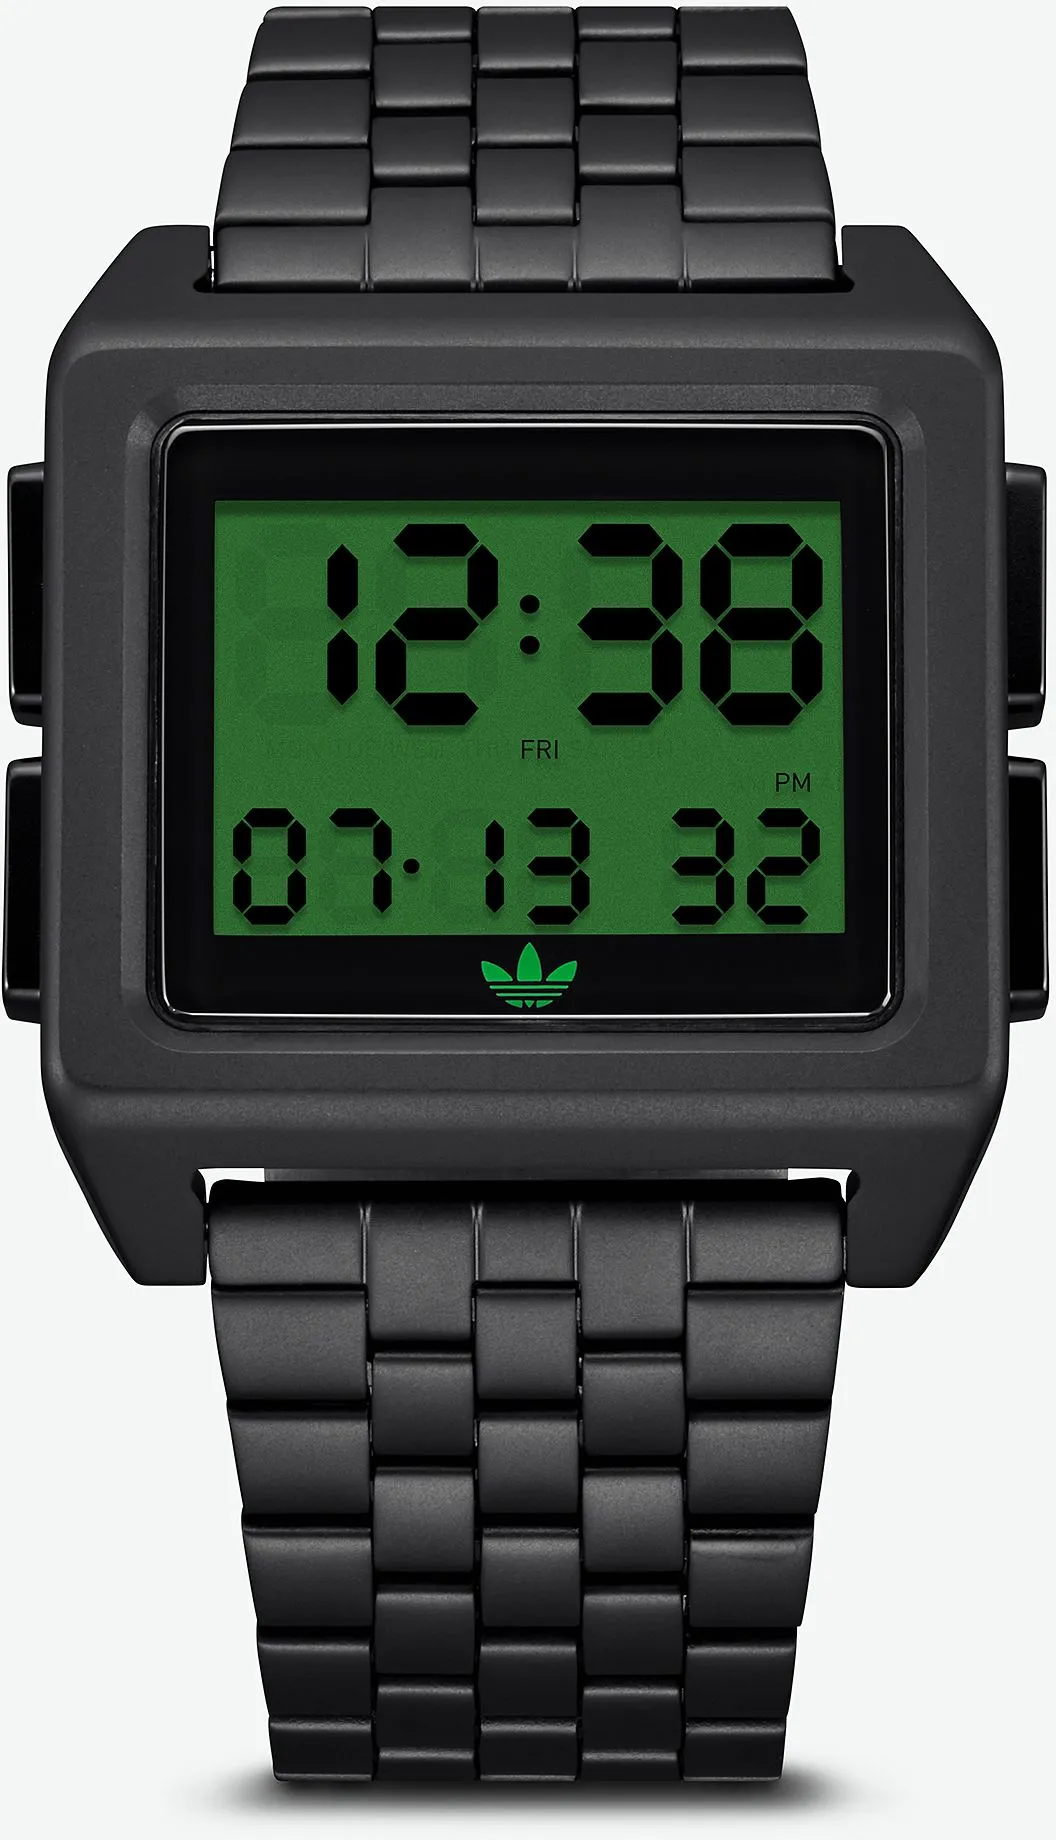 Adidas Watches Archive_M1. Men s 70 s Style Stainless Steel Digital Watch with 5 Link Bracelet (36 mm)